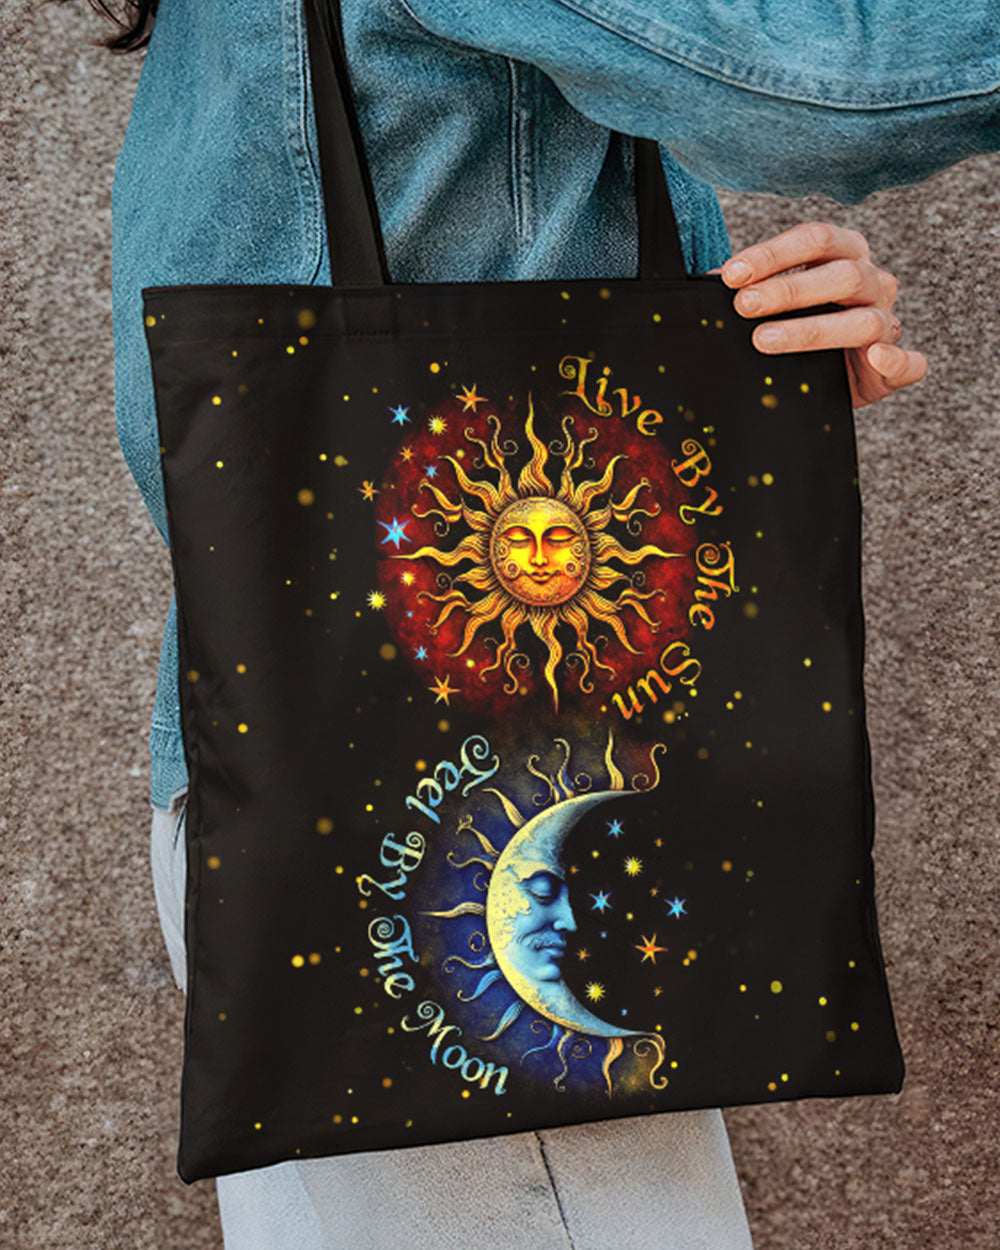 LIVE BY THE SUN TOTE BAG - TYTM2203237